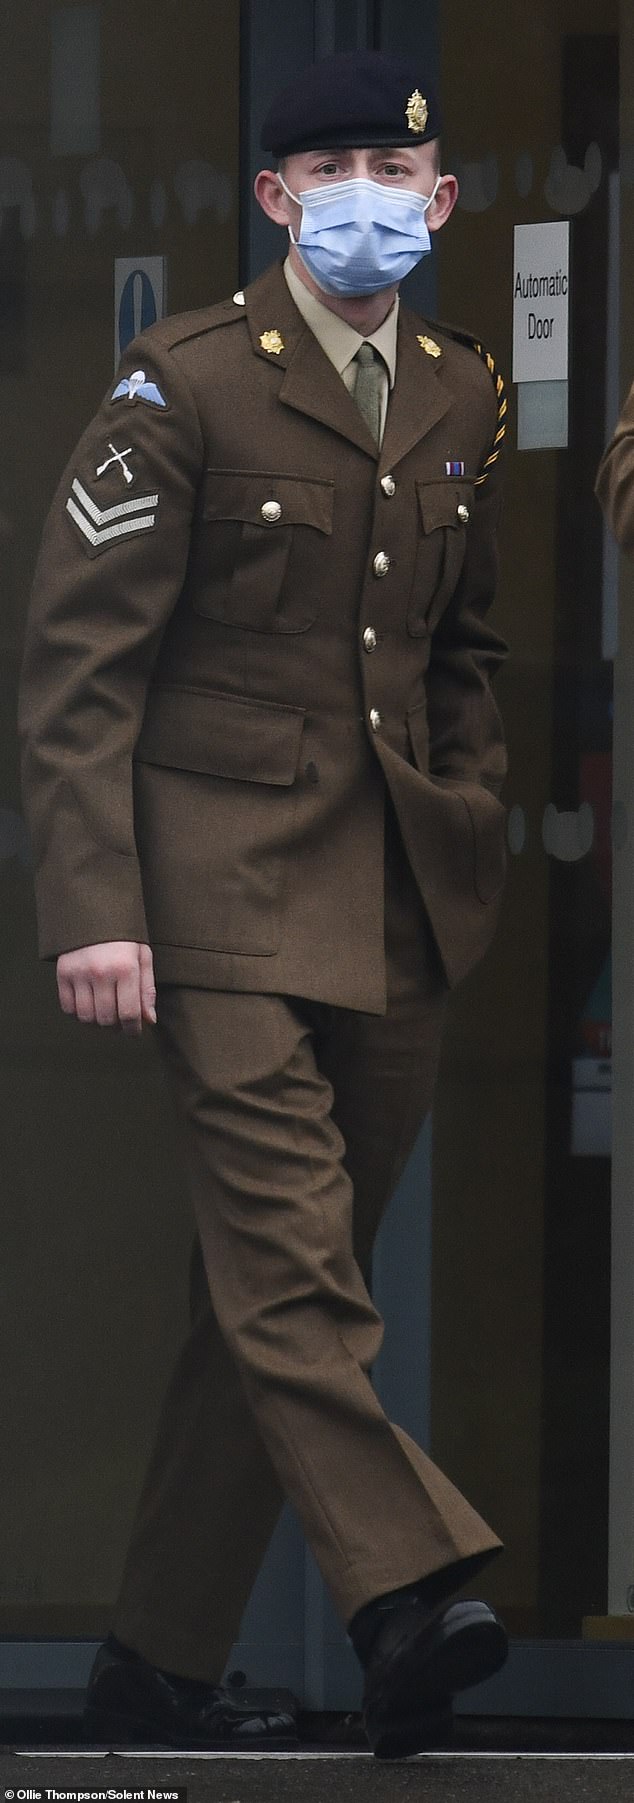 Corporal Daniel Conway allegedly raped the woman after a night out. A court martial heard the victim